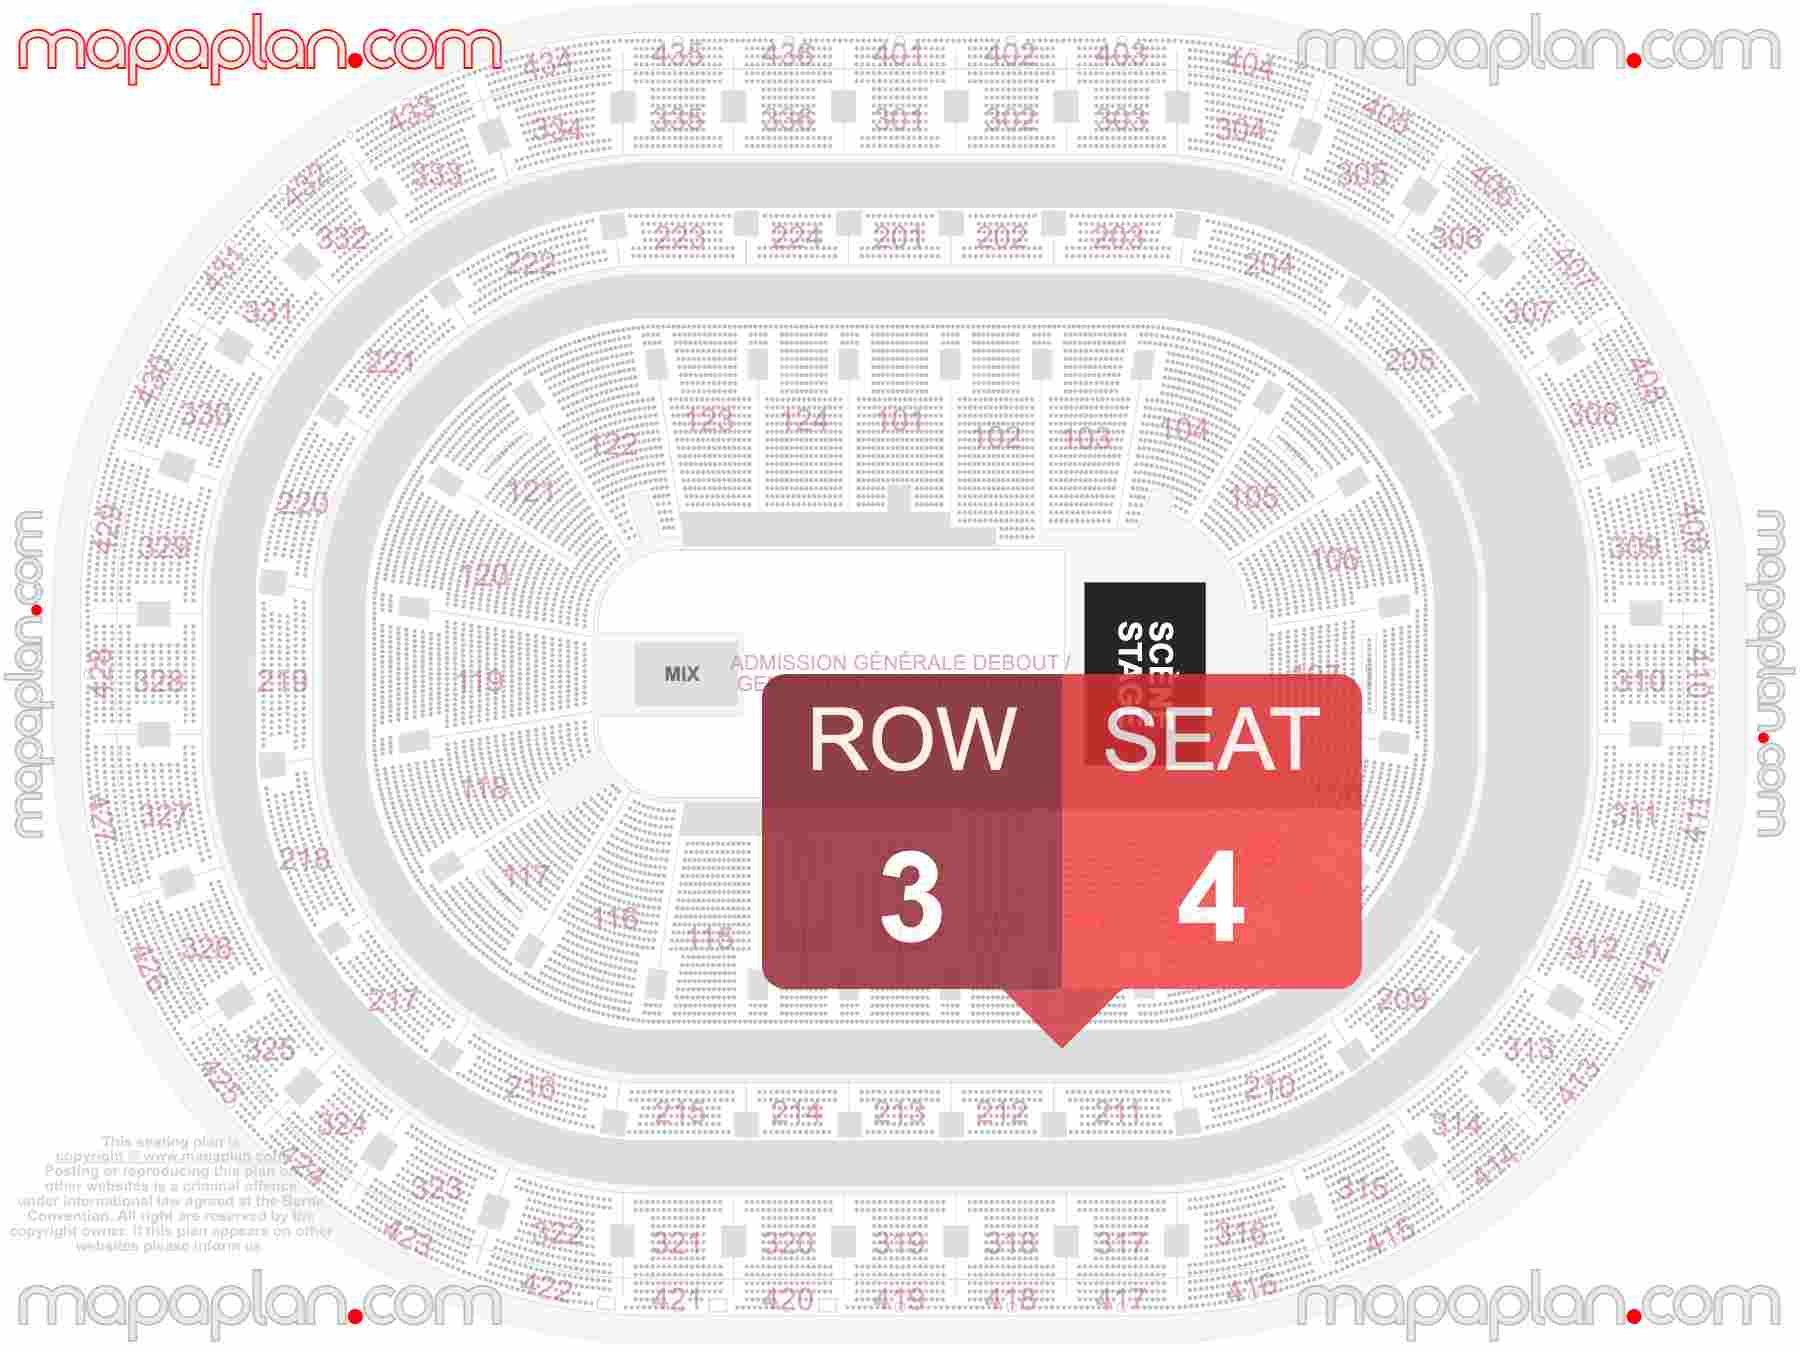 Montreal Bell Centre seating map Concert with floor general admission standing detailed seating map - 3d virtual seat numbers and row layout